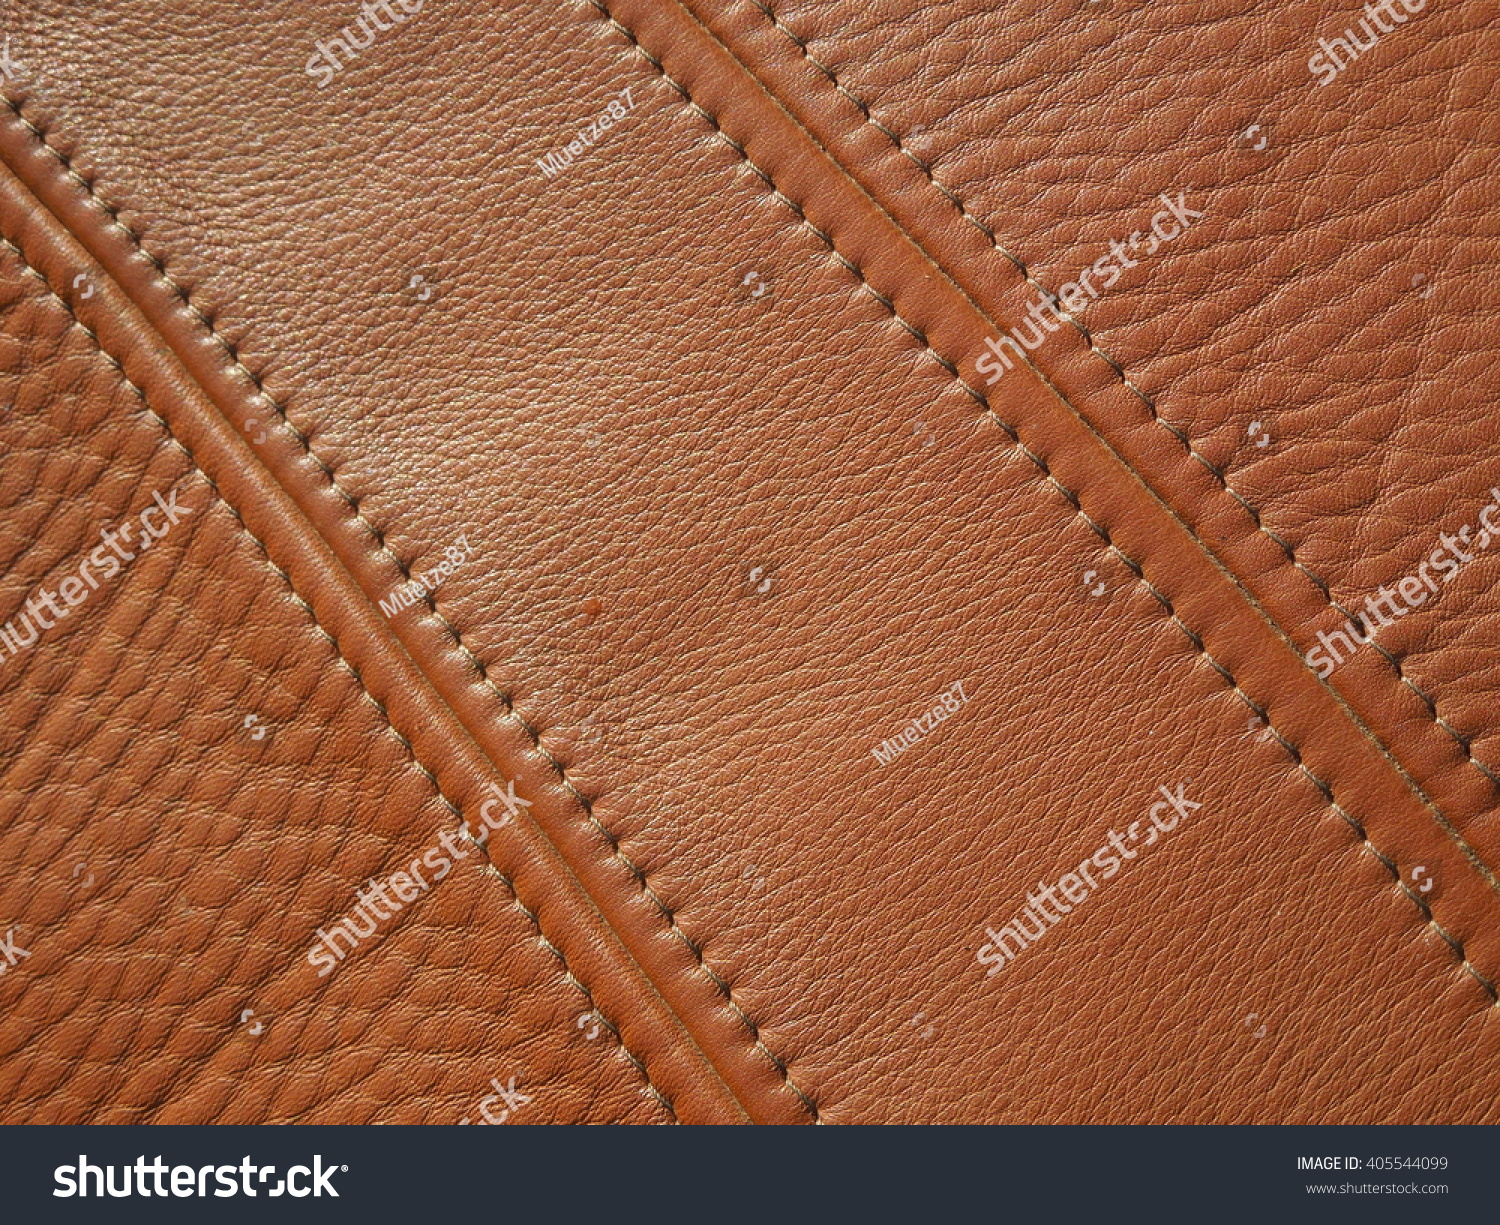 Sewed Cowhide High Definition Detail Textures Stock Photo Edit